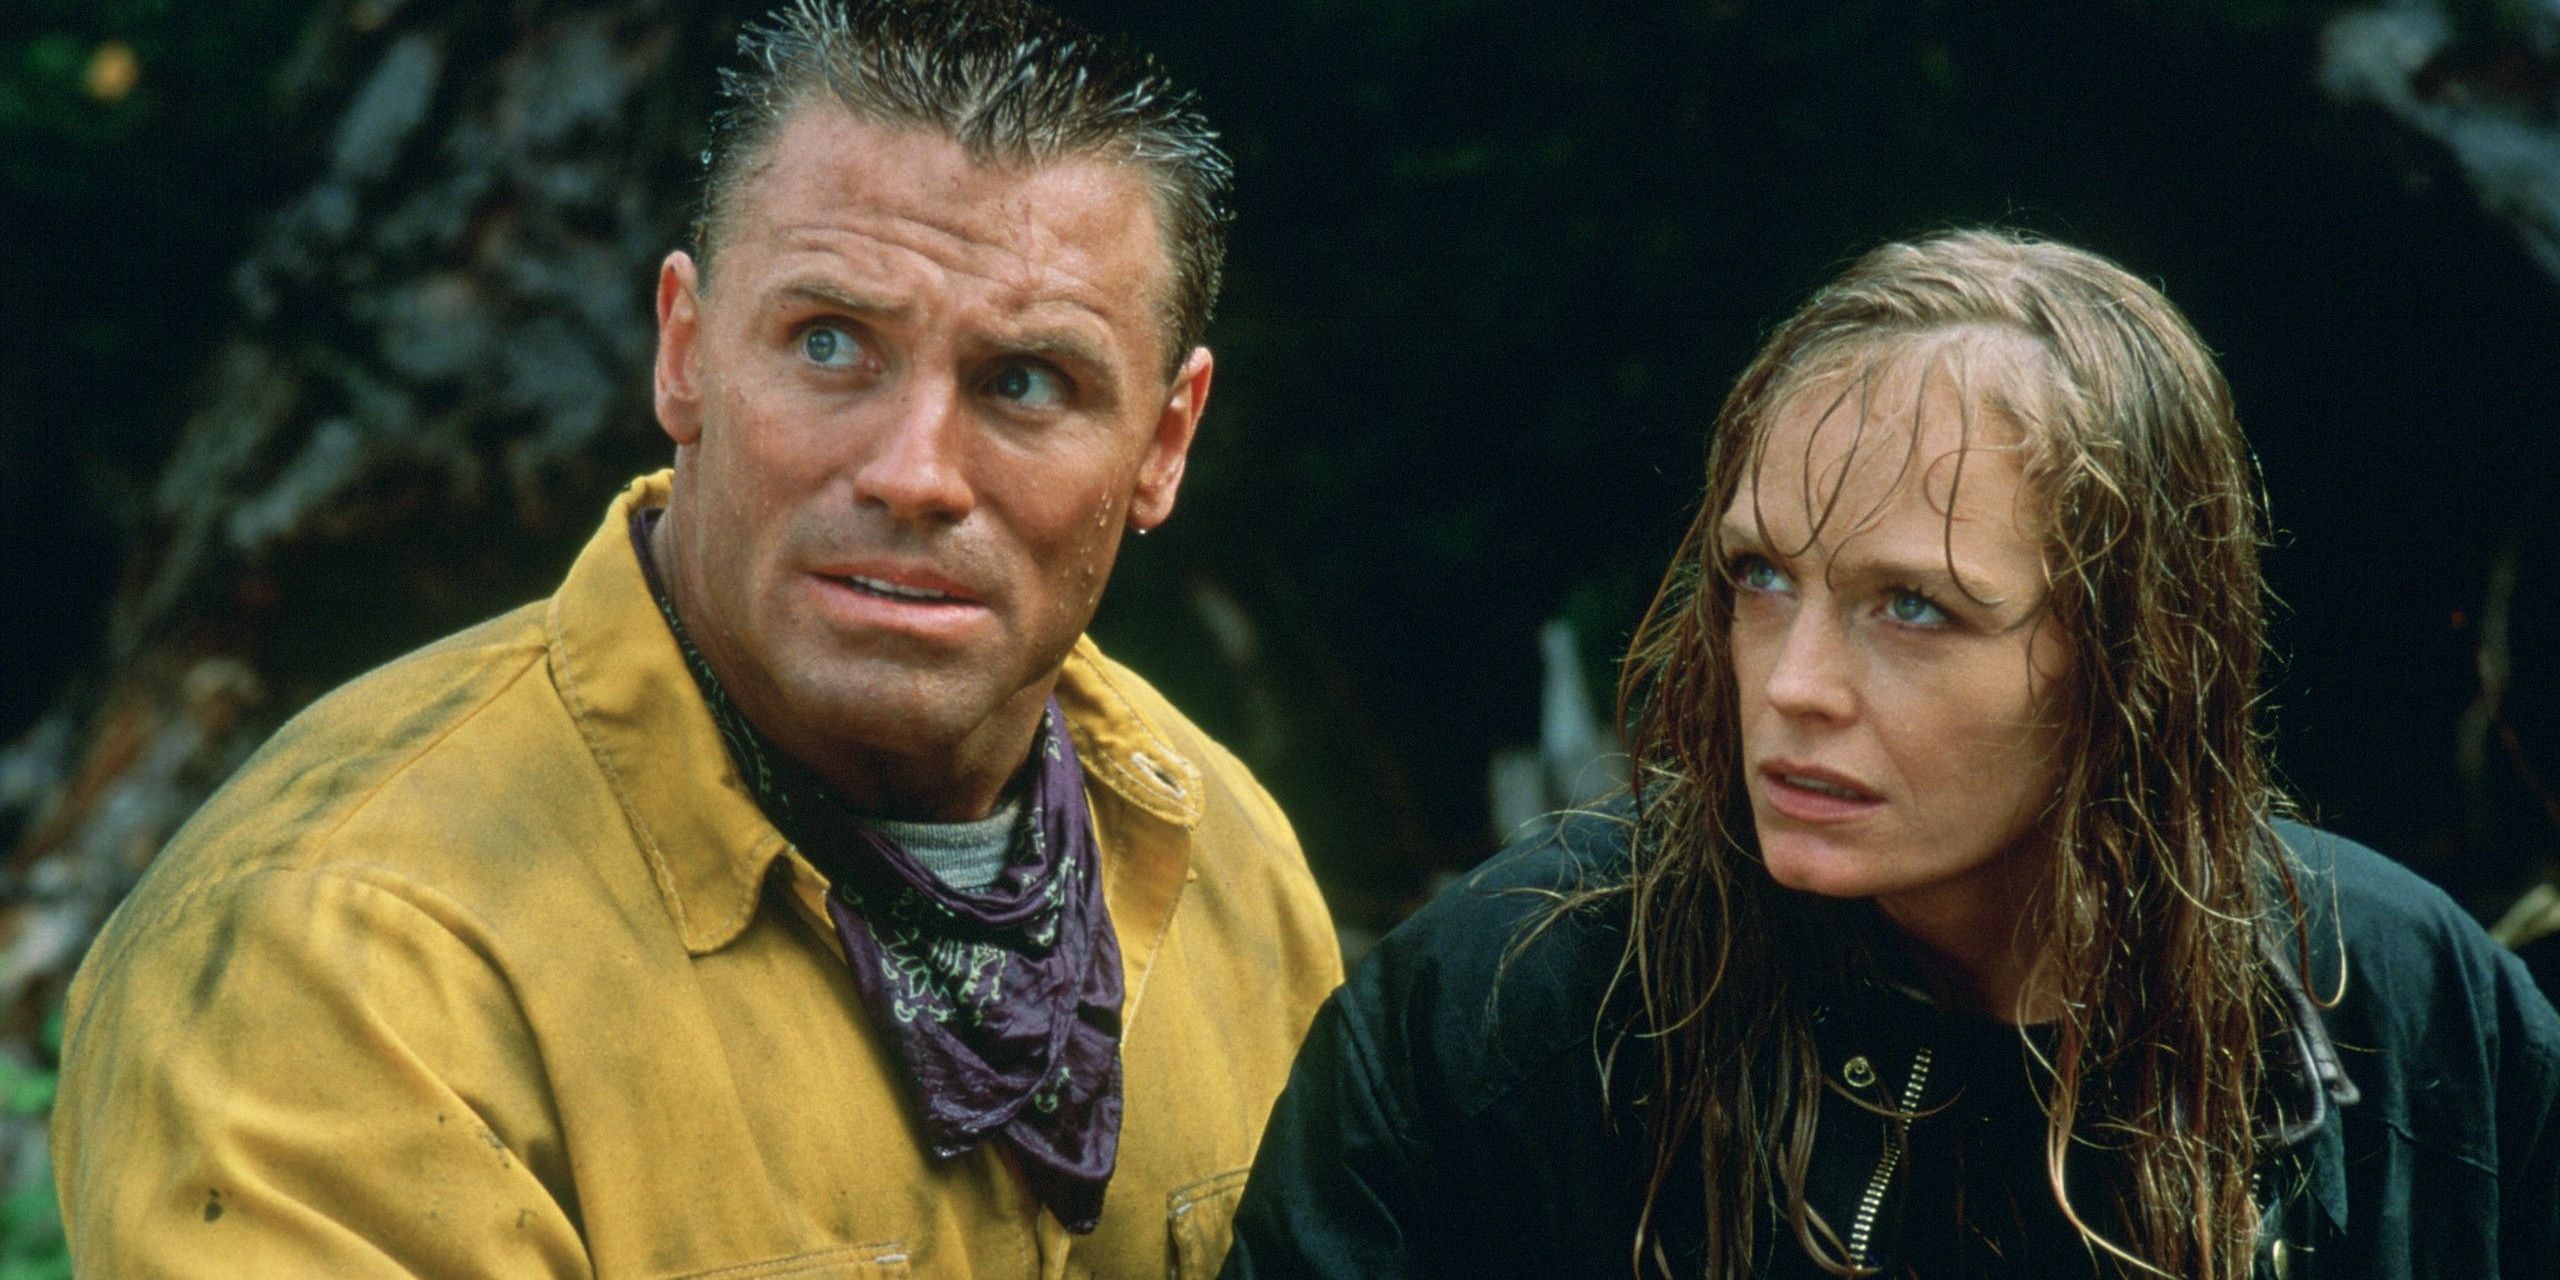 Howie Long and Suzy Amis looking off camera in the forest in Firestorm.